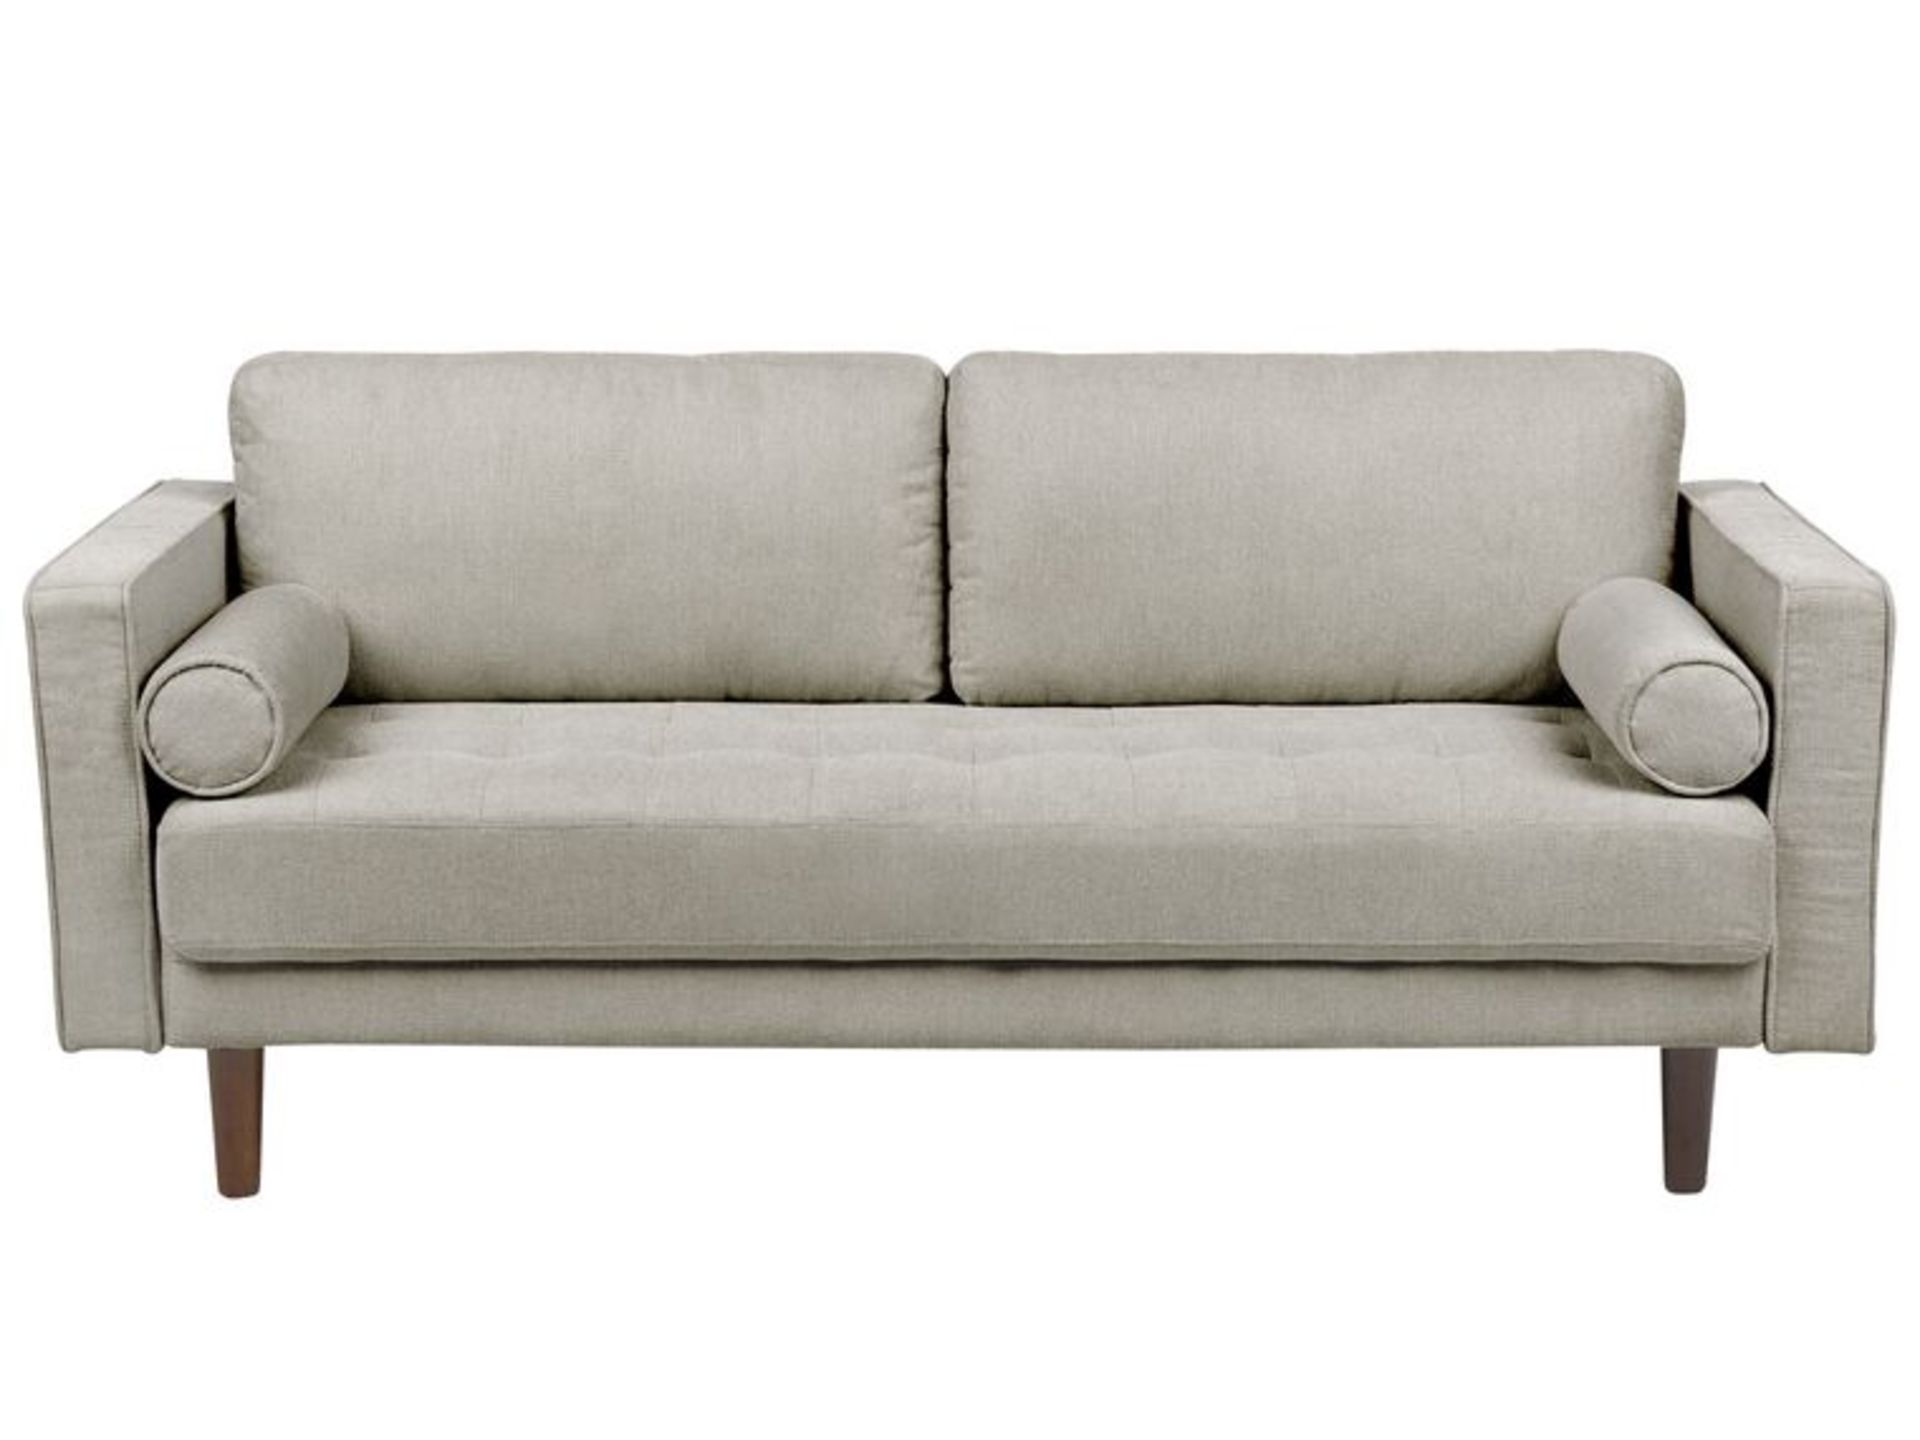 Nurmo 3 Seater Fabric Sofa Taupe. - R14. RRP £739.99. Revamp your living space with this timeless